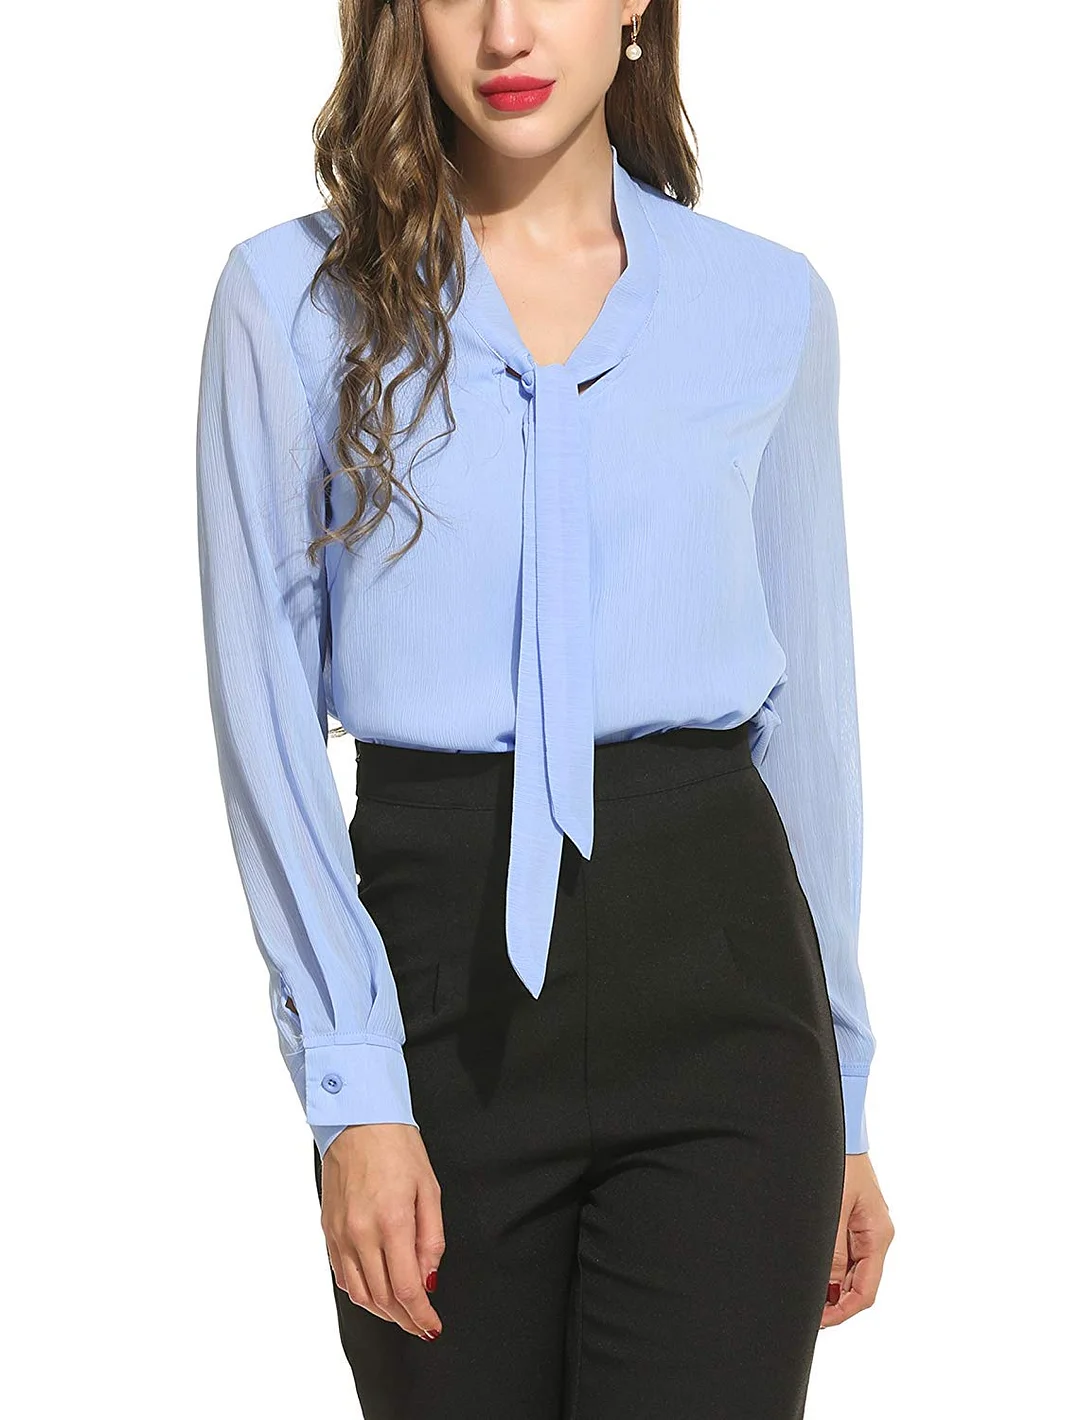 Womens Bow Tie Neck Long/Short Sleeve Casual Office Work Chiffon Blouse Shirts Tops